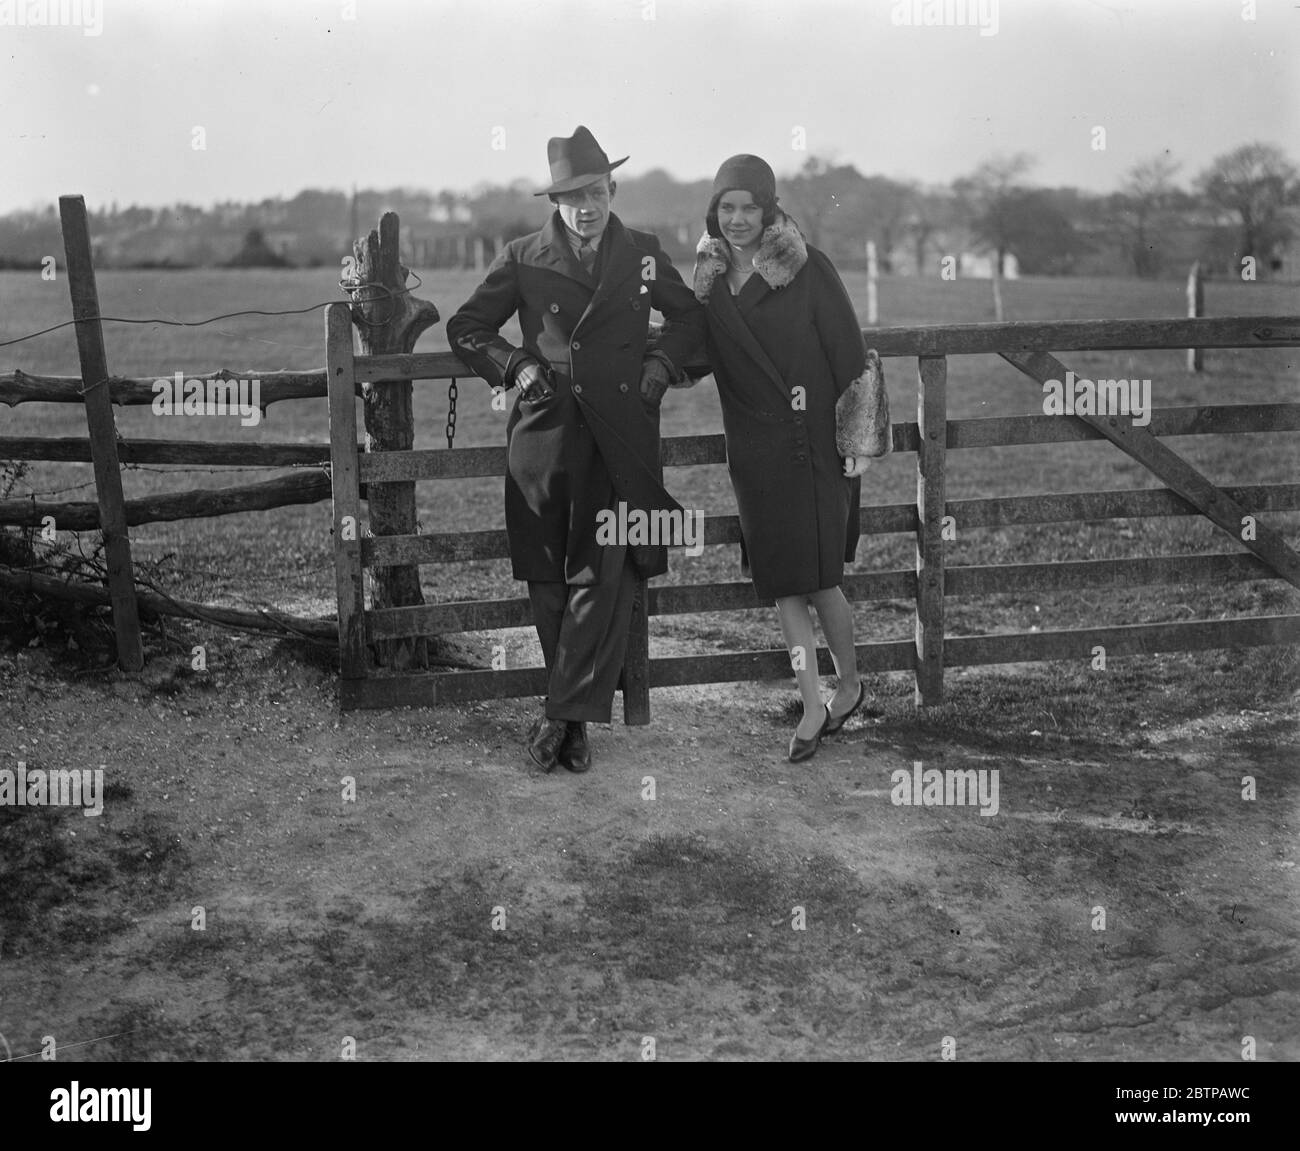 Pat Donoghue to wed . Mr Pat Donoghue , the jockey son of Steve Donoghue , is engaged to Miss Hilda Harvey , the 19 year old daughter of Mr P W Harvey a builder of Sway , Hampshire . Pat Donoghue with Miss Harvey at Sway . 10 February 1930 Stock Photo